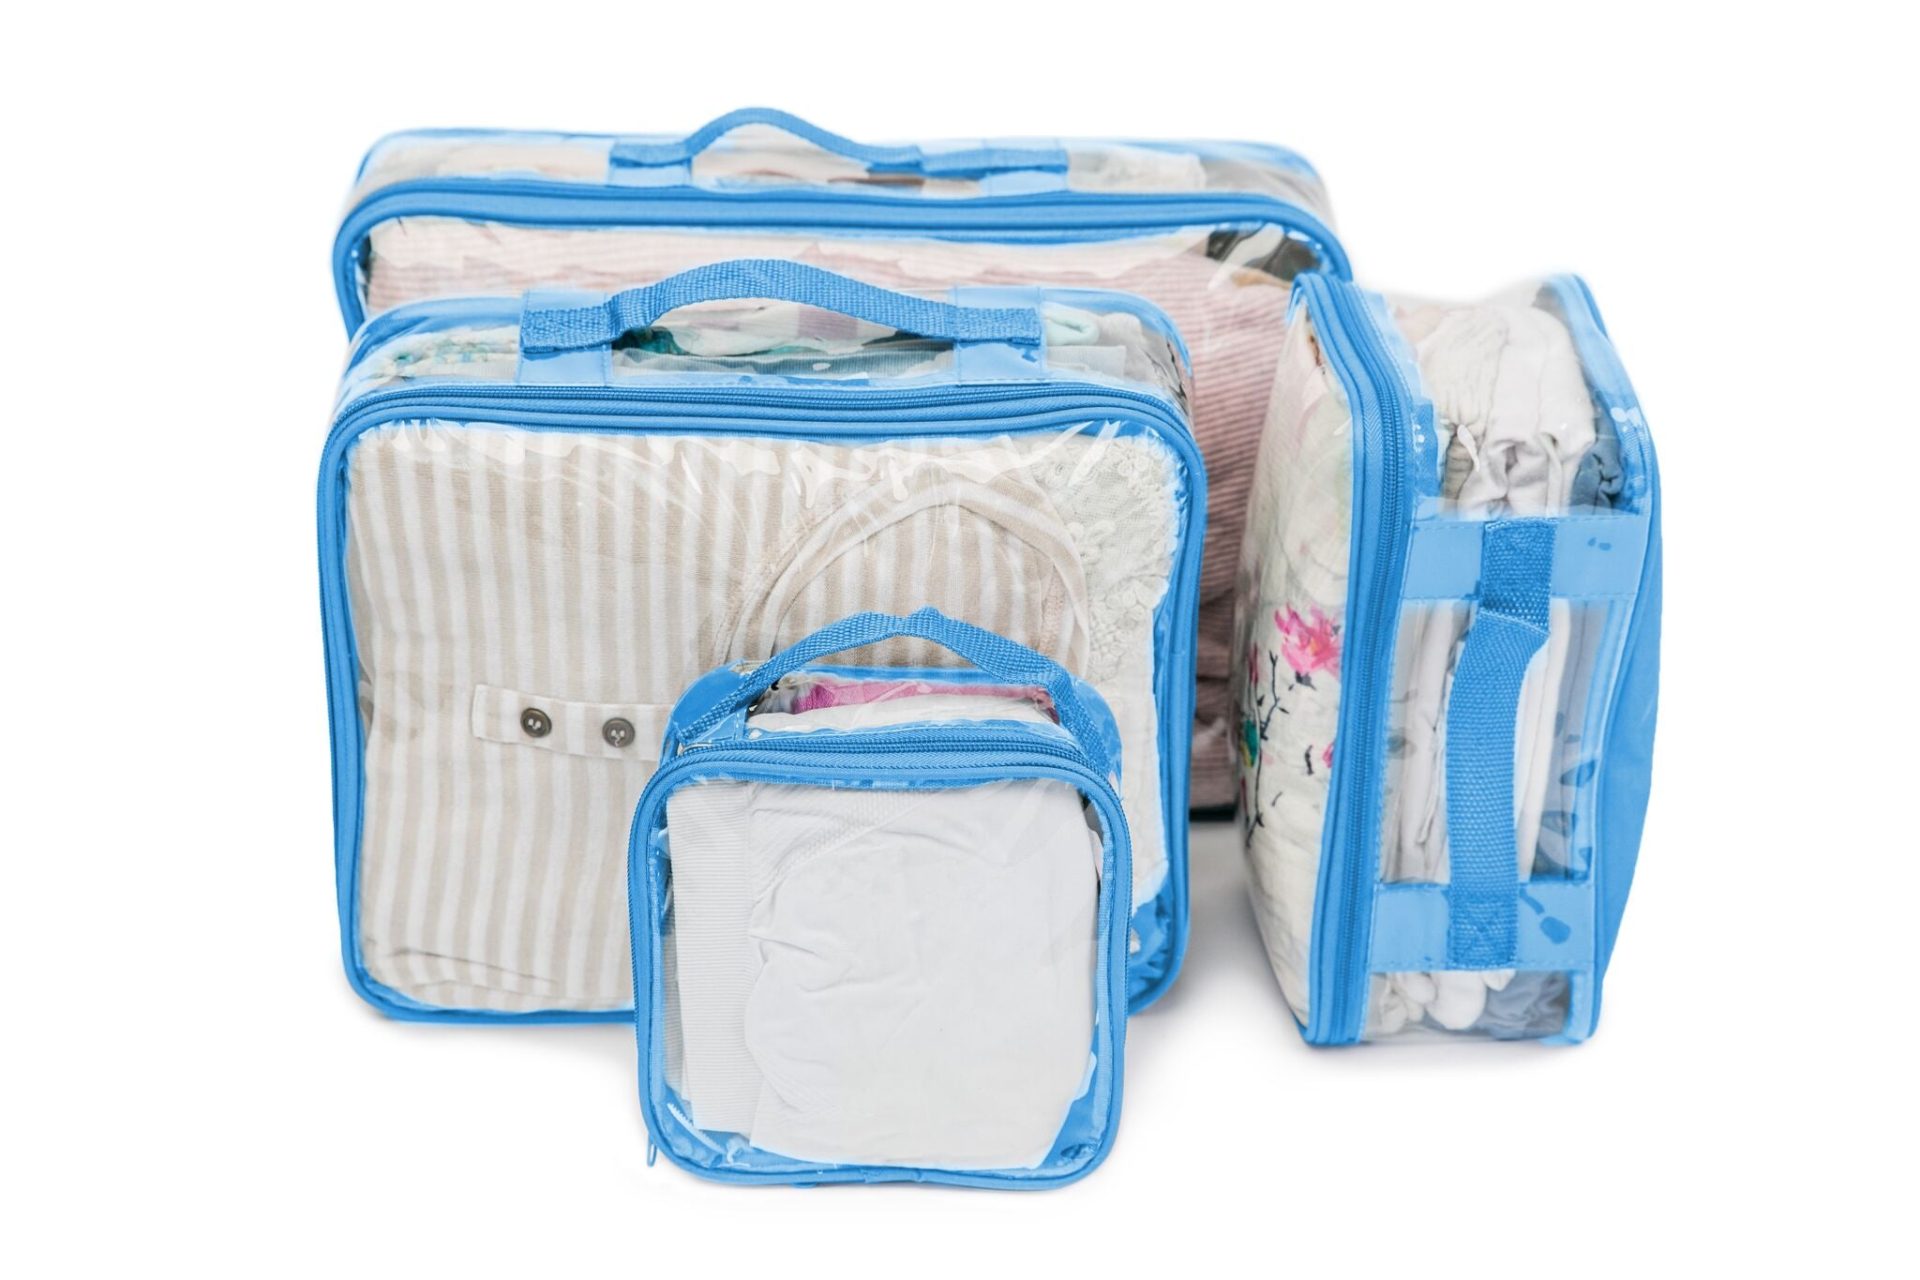 Best type of luggage organizer for suitcase